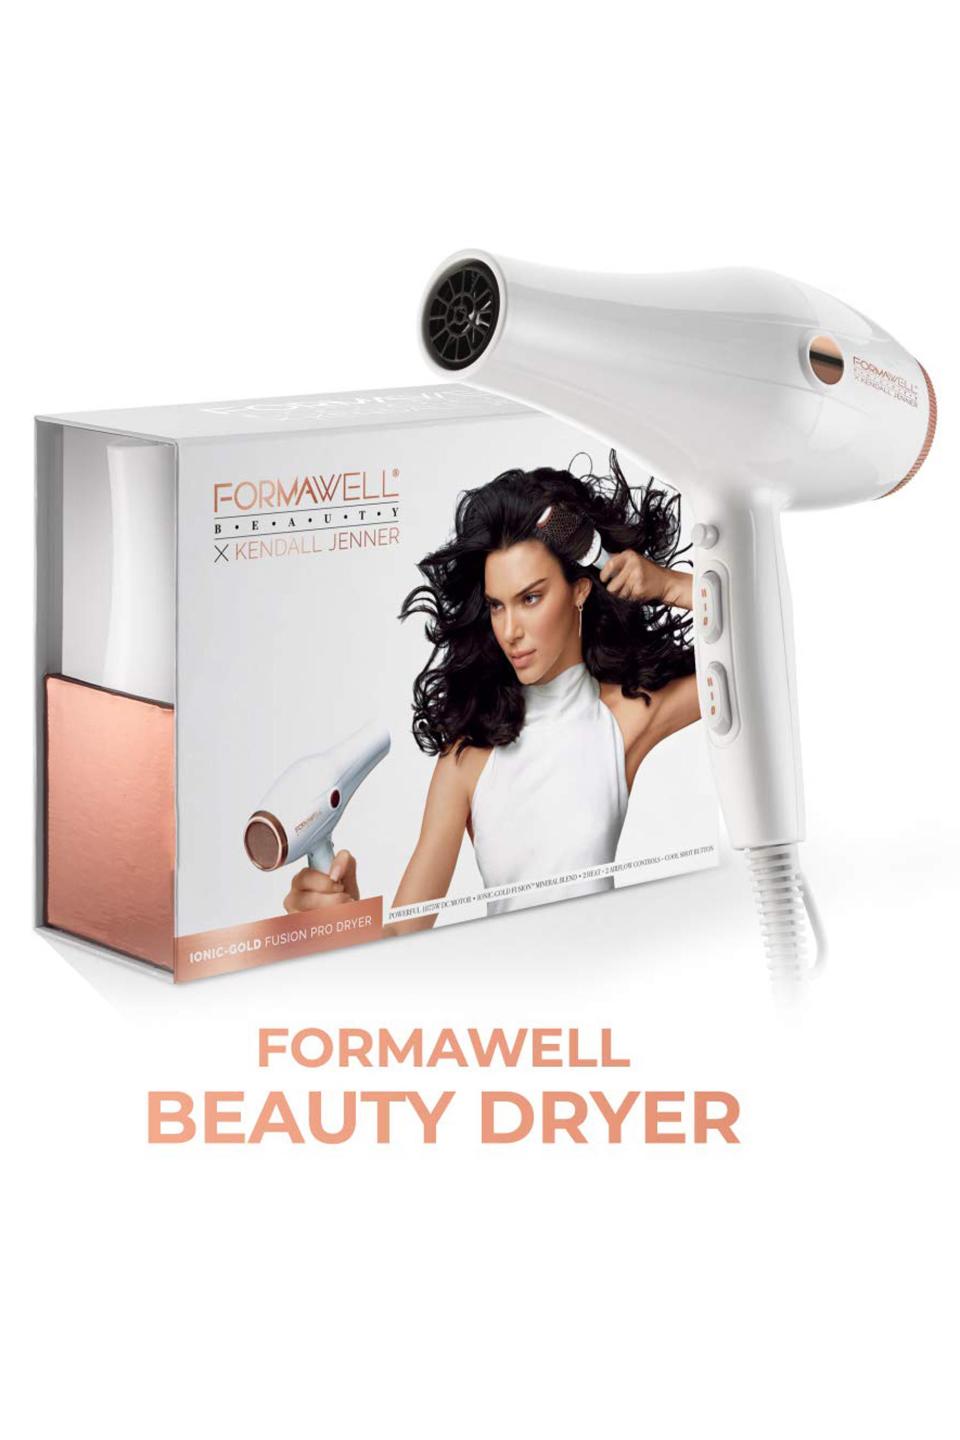 6) Formawell Beauty x Kendall Jenner Ionic Dryer